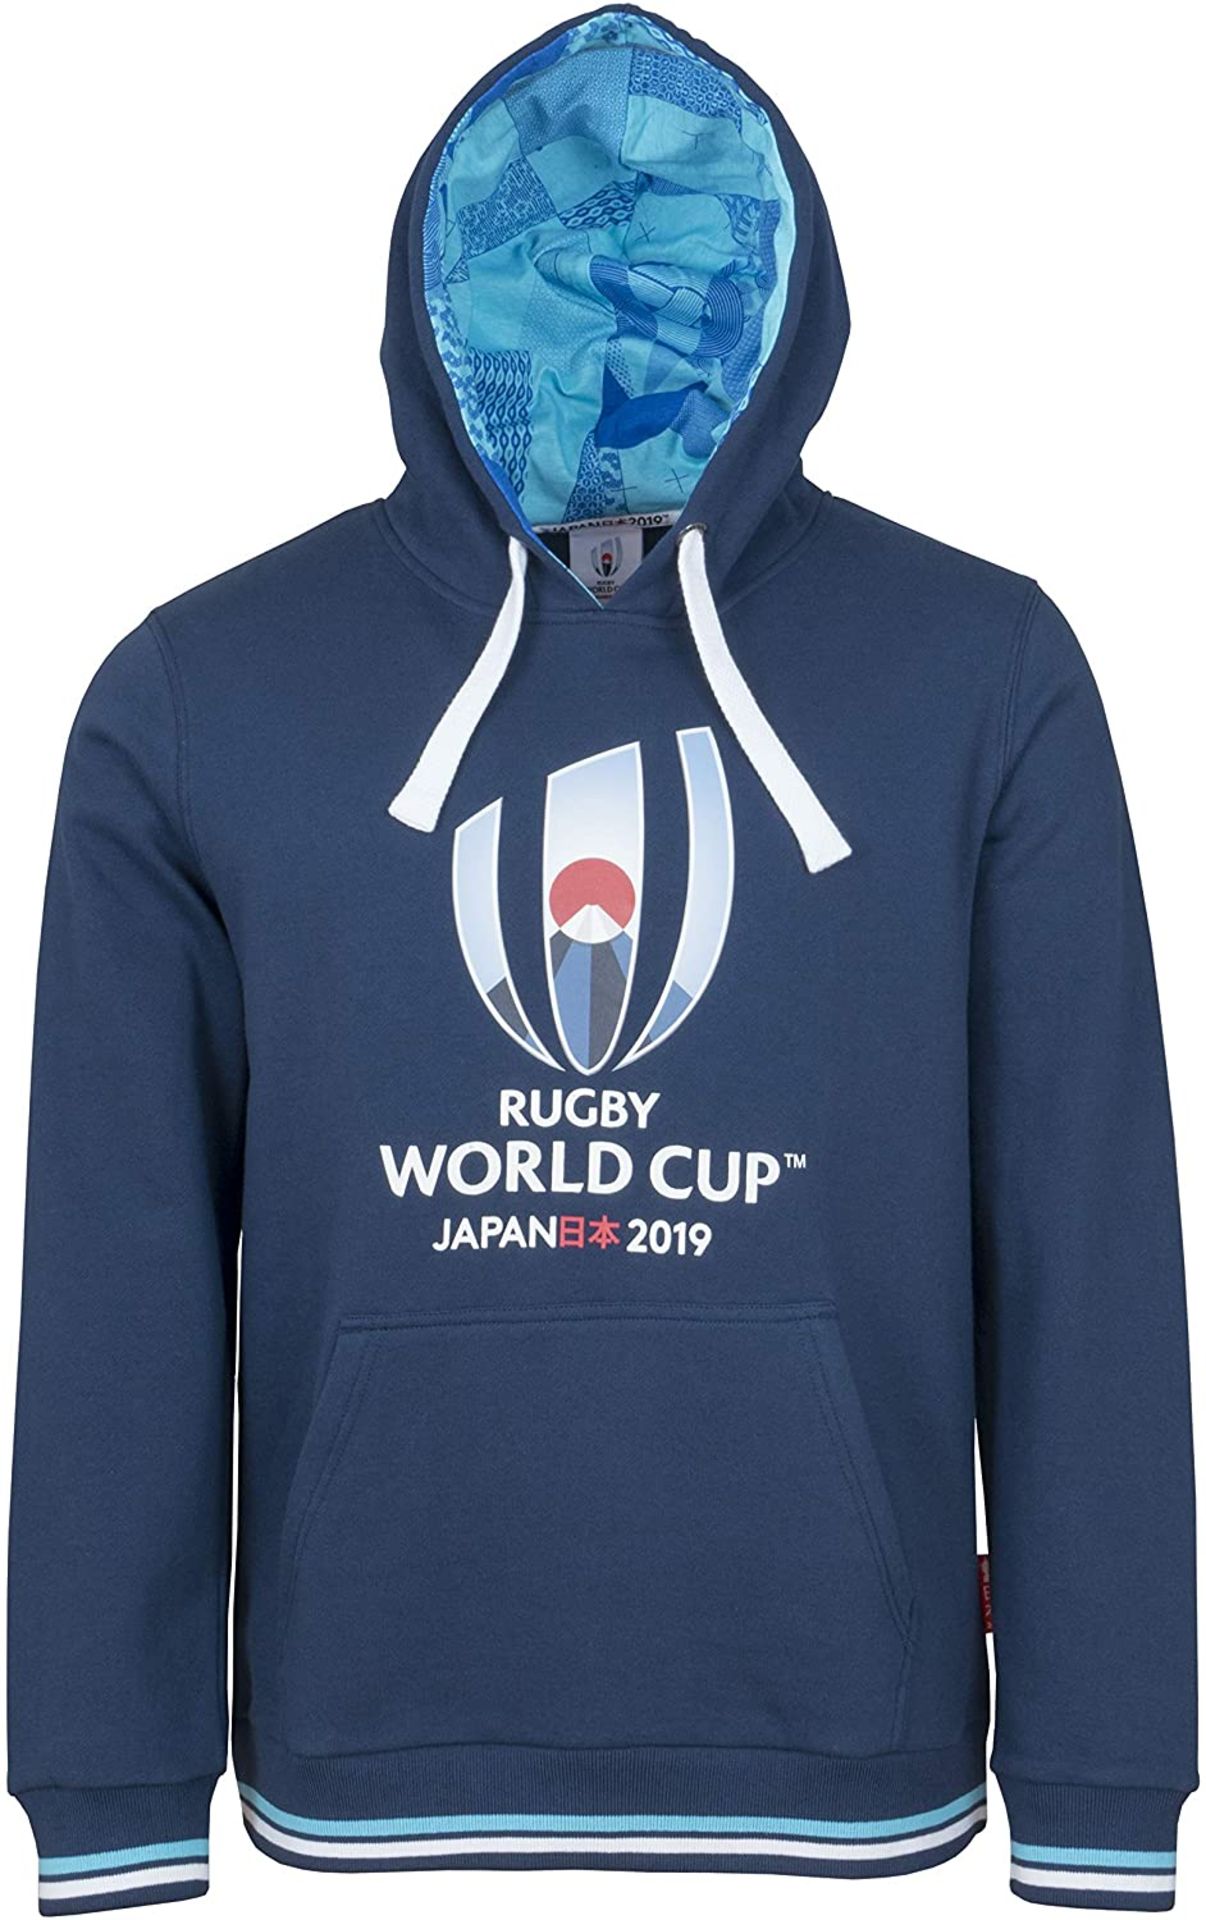 BRAND NEW RUGBY WORLD CUP HOODY SIZE SMALL RRP £45Condition ReportBRAND NEW